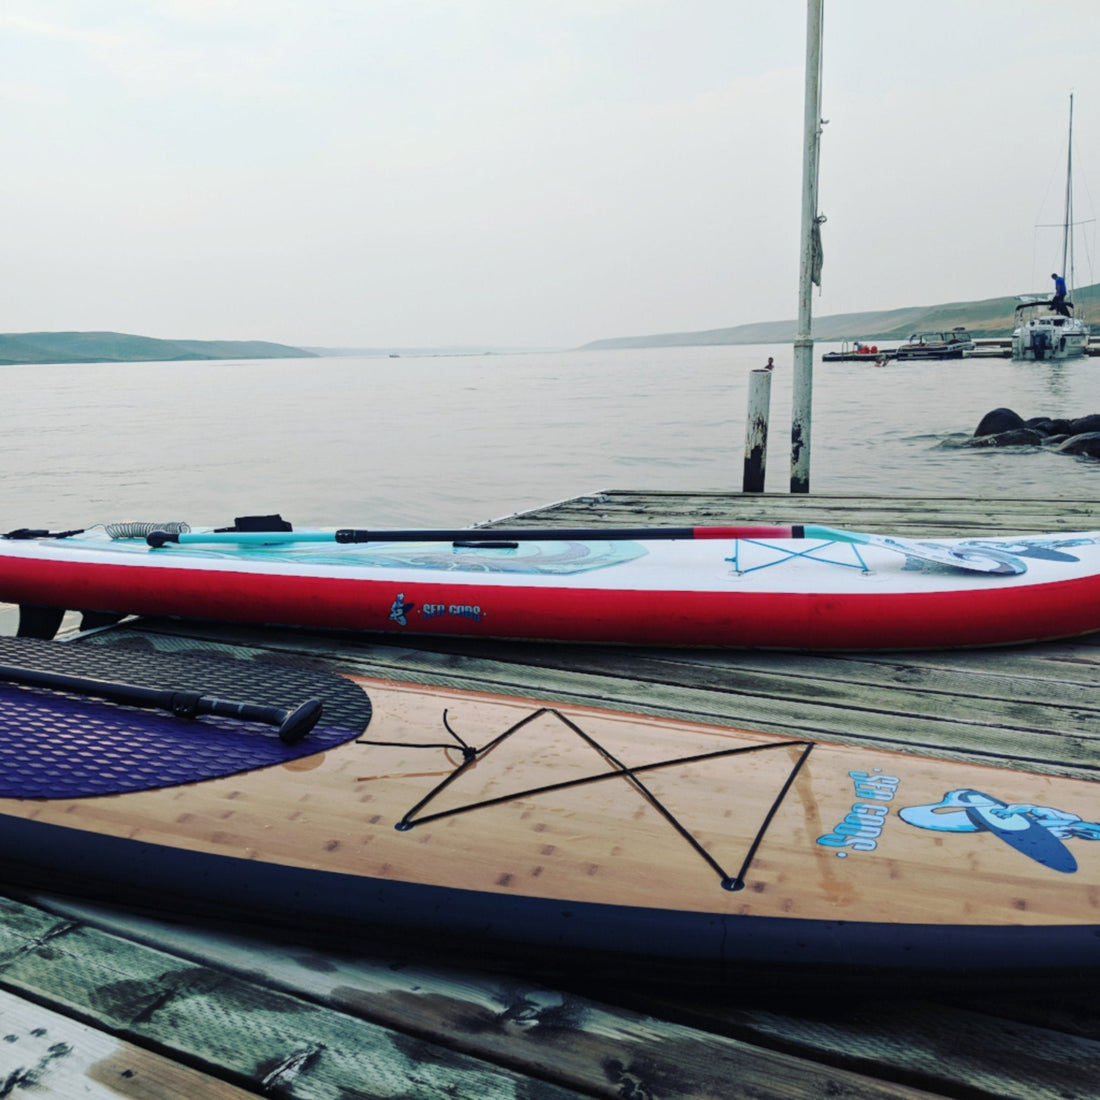 Composite paddle board and inflatable paddleboard on dock at lake